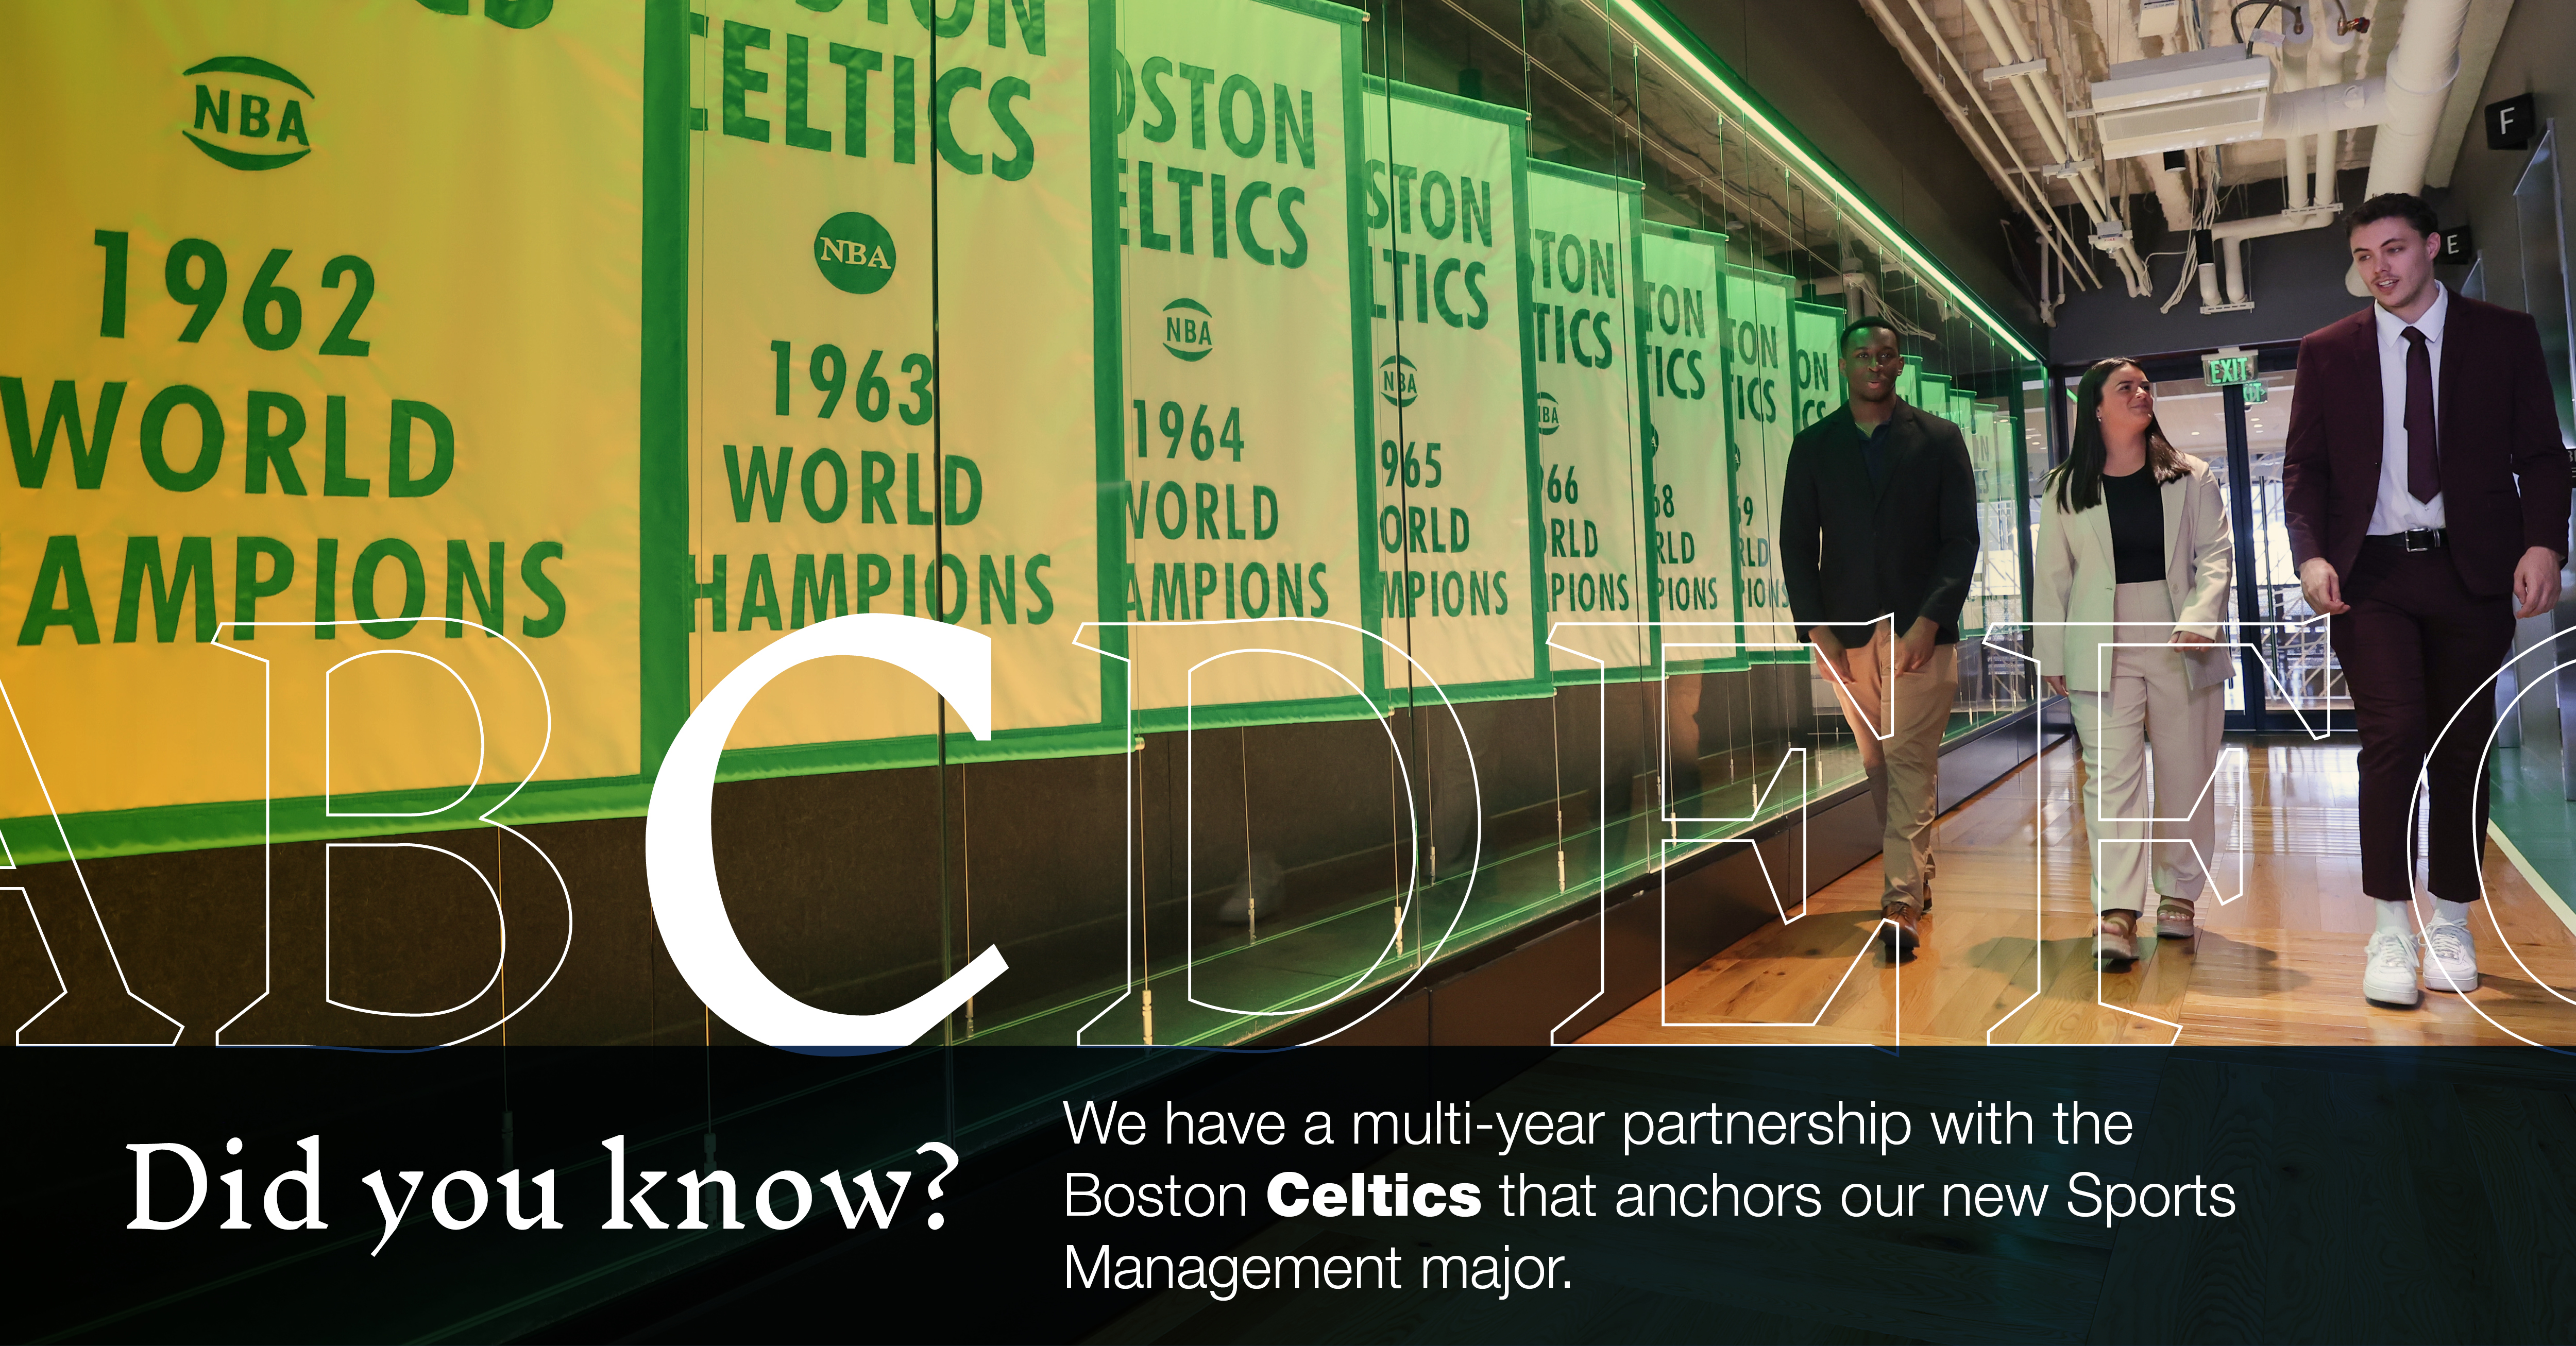 Image of students walking through Boston Celtics headquarters: "Did you know we have a partnership with the Boston Celtics that anchors our new sports management major?"